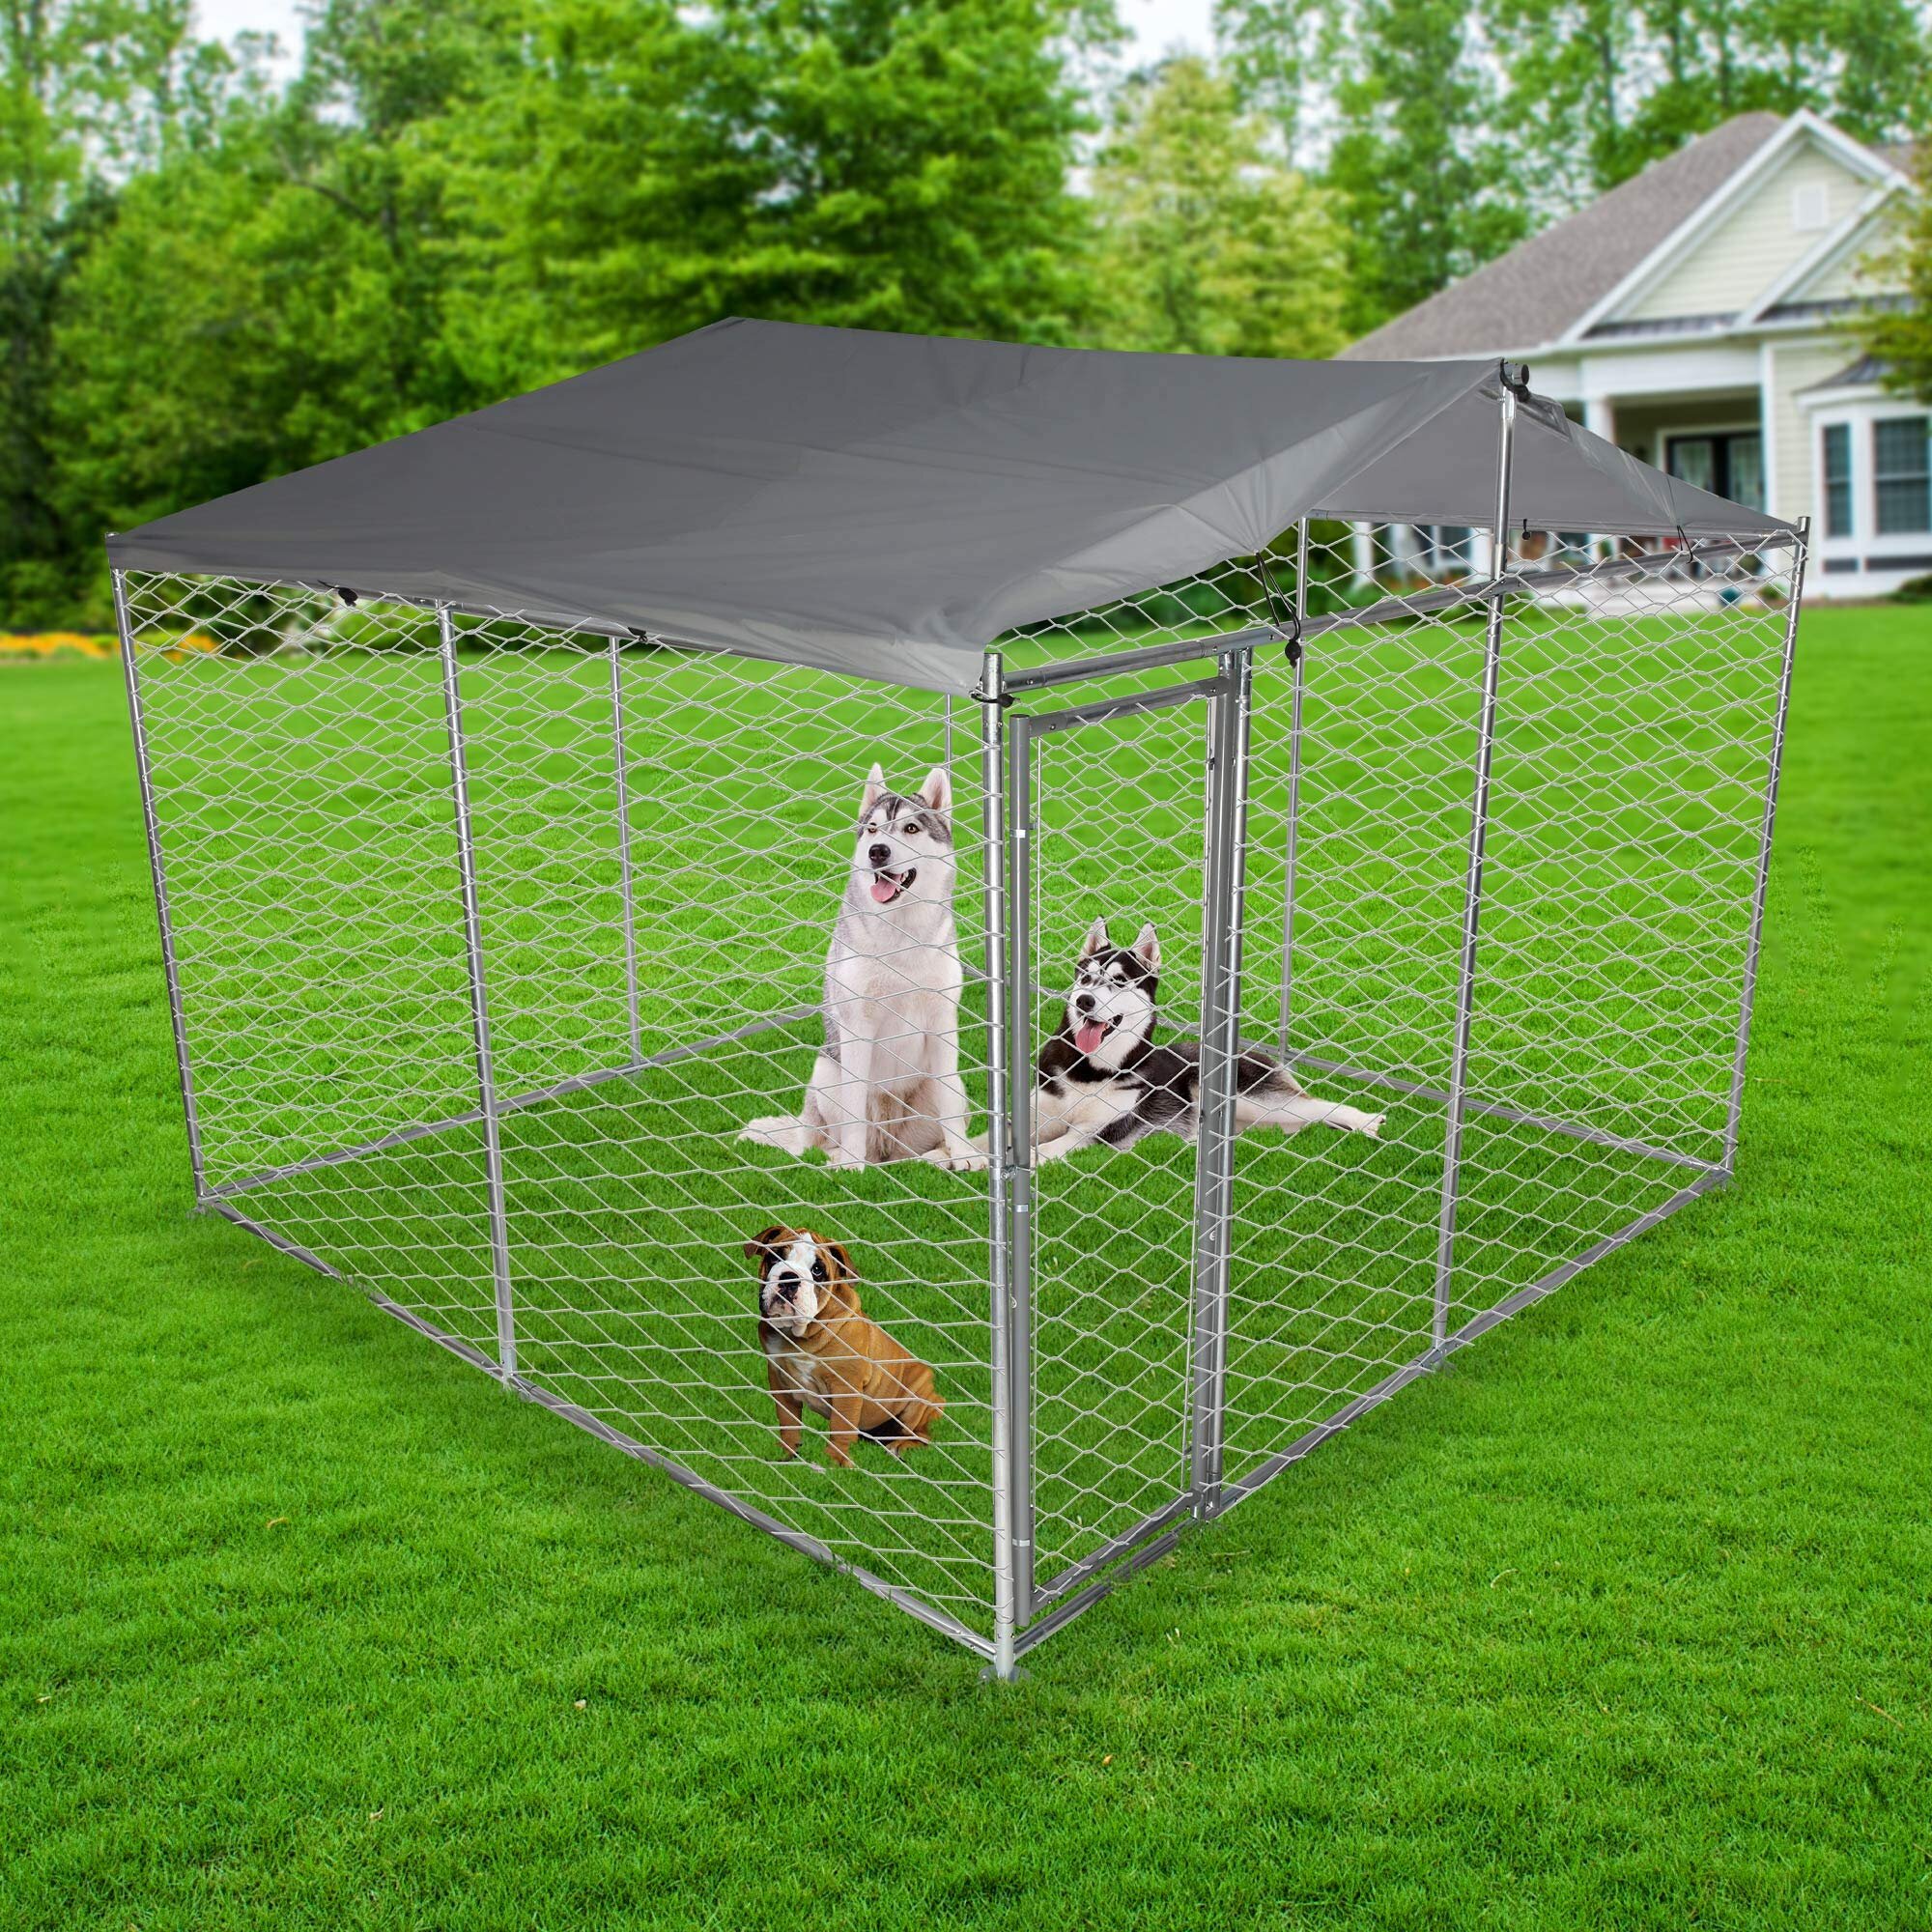 Outdoor Covered Welded Wire Steel Modular Yard Kennel Metal Pet Exercise Fence Barrier Playpen Kennel w/UV Protection Waterproof Cover & Roof Heavy-Duty Basic Expanded Metal Outdoor Dog Yard Kennel 